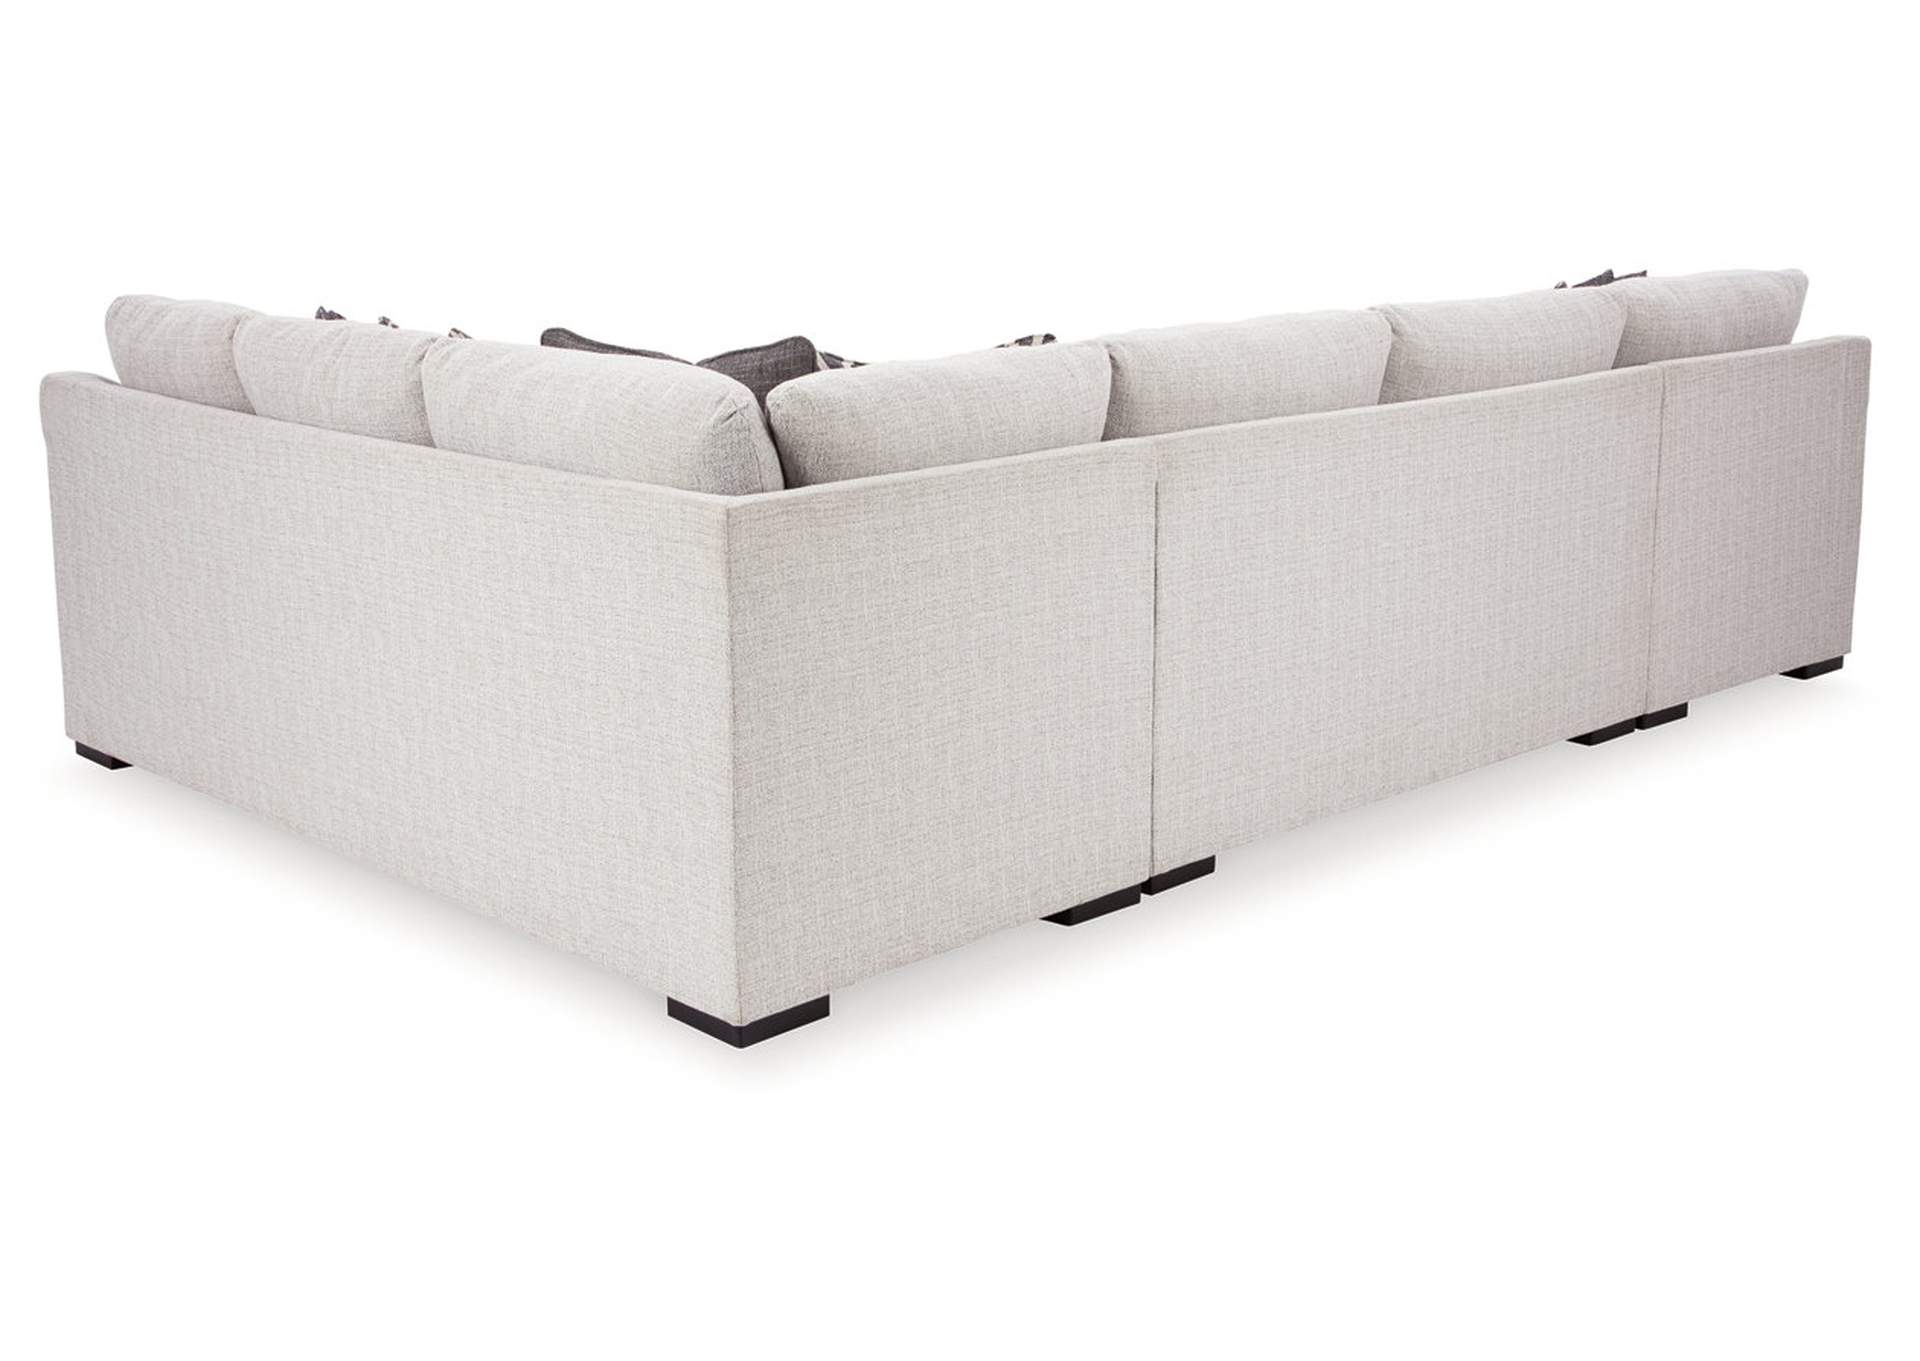 Koralynn 3-Piece Sectional with Ottoman,Benchcraft